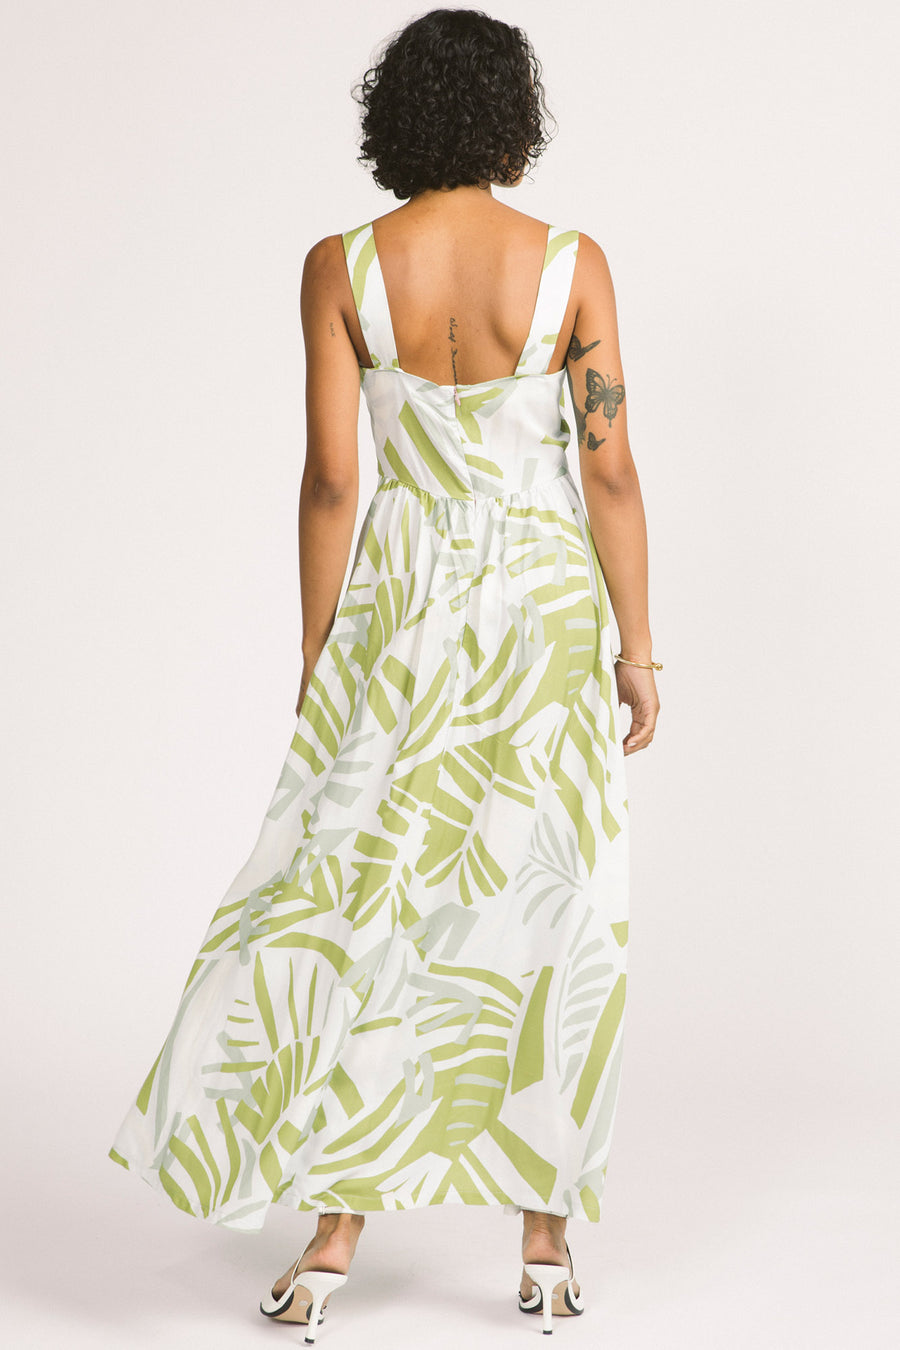 Back view of woman wearing green and white leaf print Alora maxi dress by Allison Wonderland. 